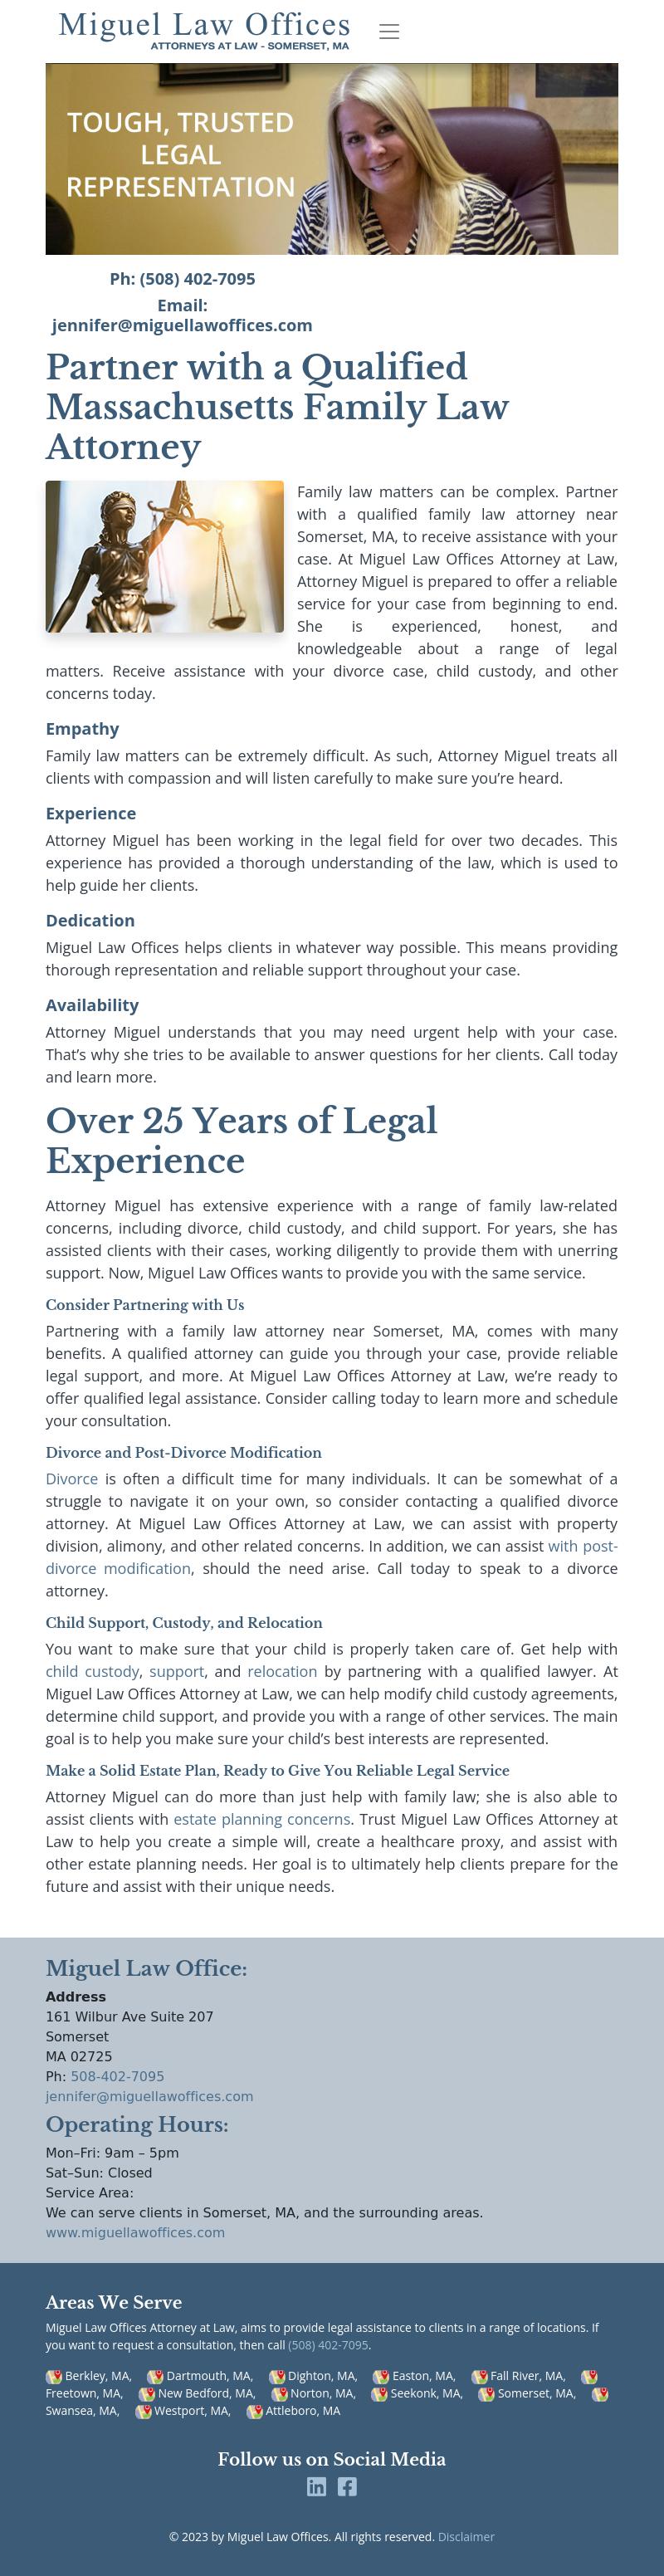 Miguel Law Offices - Somerset MA Lawyers